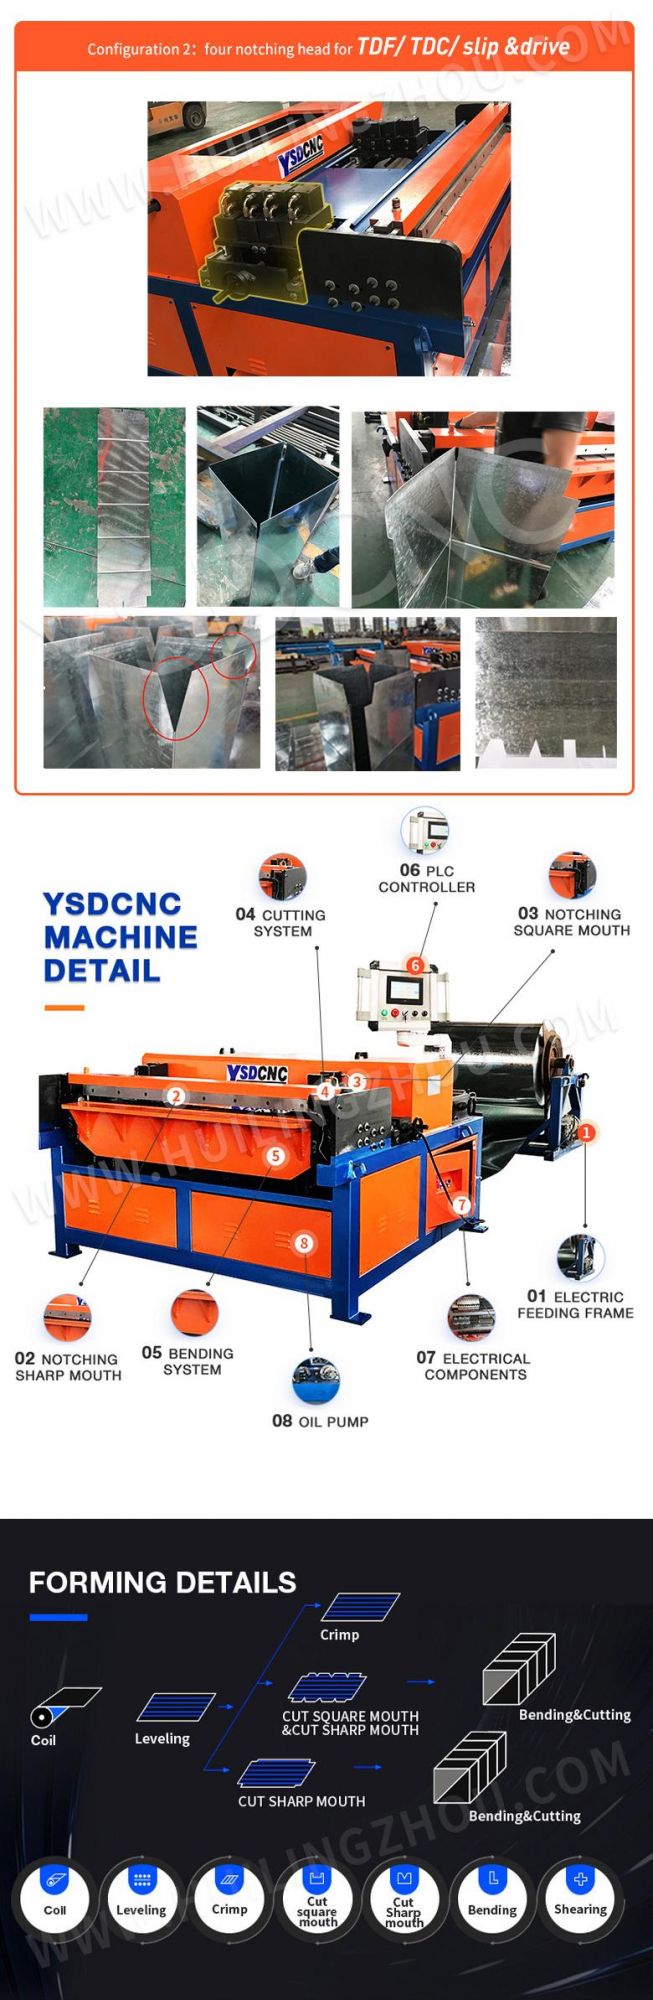 Auto Air Duct Making Machine, HVAC Duct Line 3, Square Duct Forming Machine